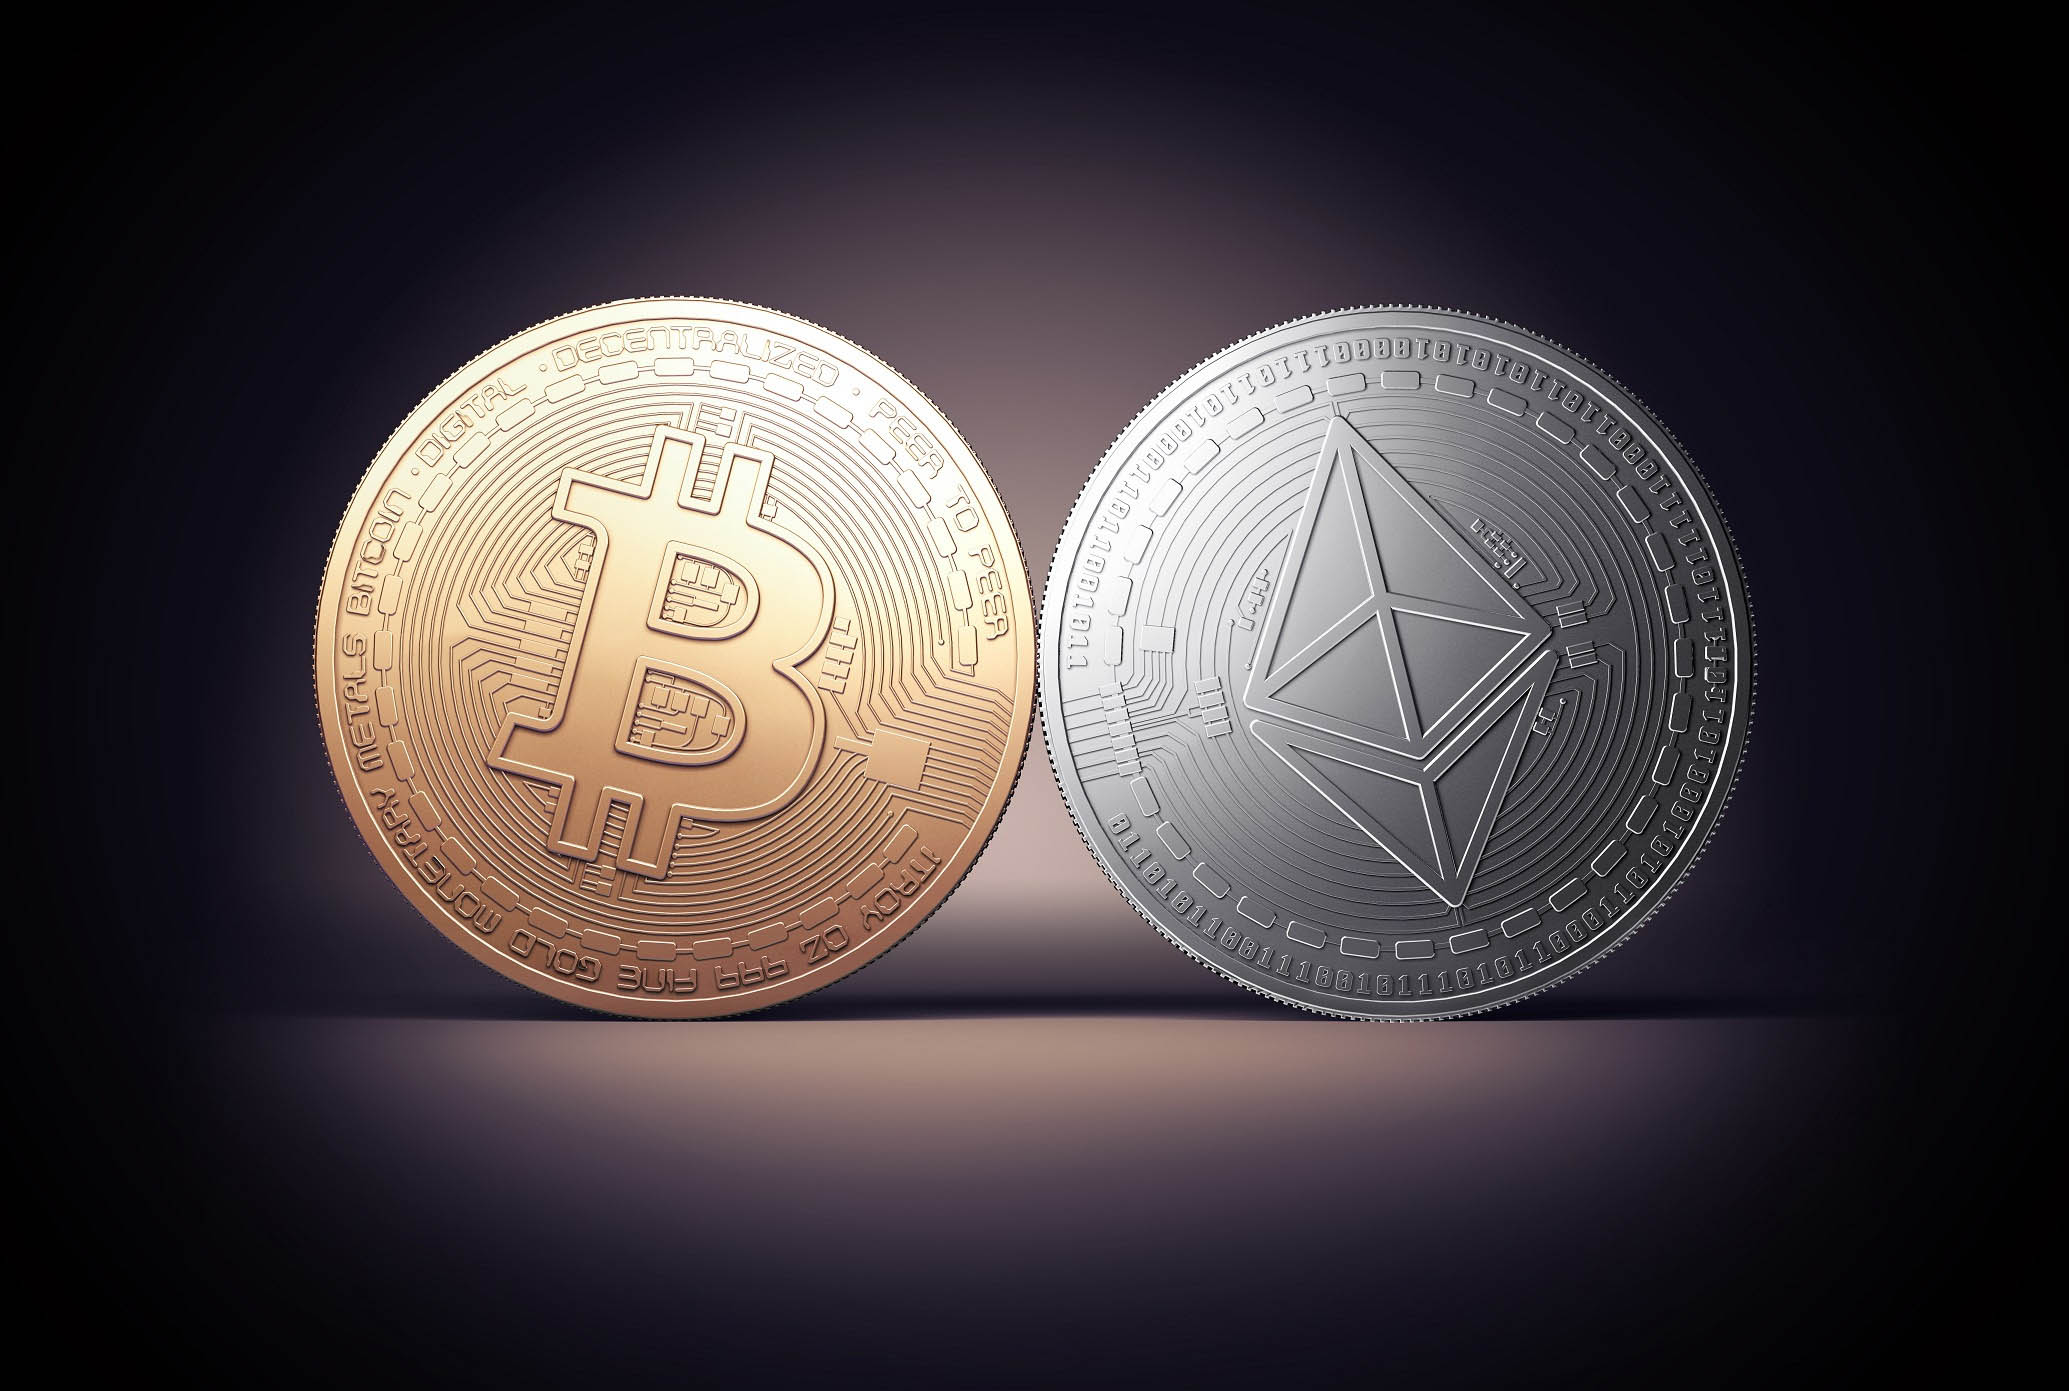 Is Ethereum similar to Bitcoin